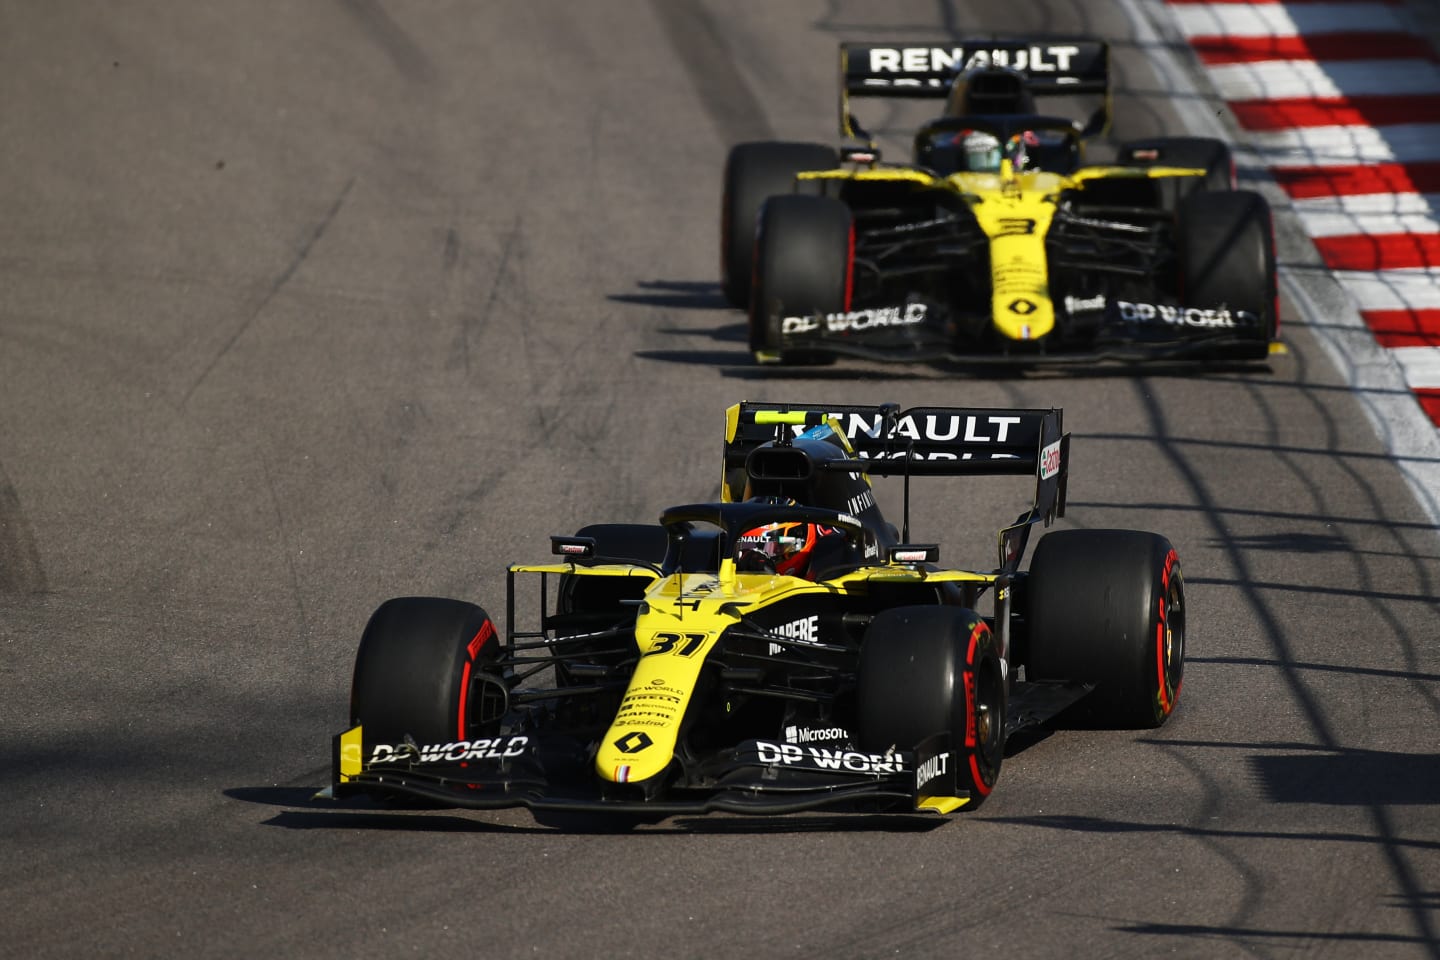 SOCHI, RUSSIA - SEPTEMBER 27: Esteban Ocon of France driving the (31) Renault Sport Formula One Team RS20 leads Daniel Ricciardo of Australia driving the (3) Renault Sport Formula One Team RS20 during the F1 Grand Prix of Russia at Sochi Autodrom on September 27, 2020 in Sochi, Russia. (Photo by Bryn Lennon/Getty Images)